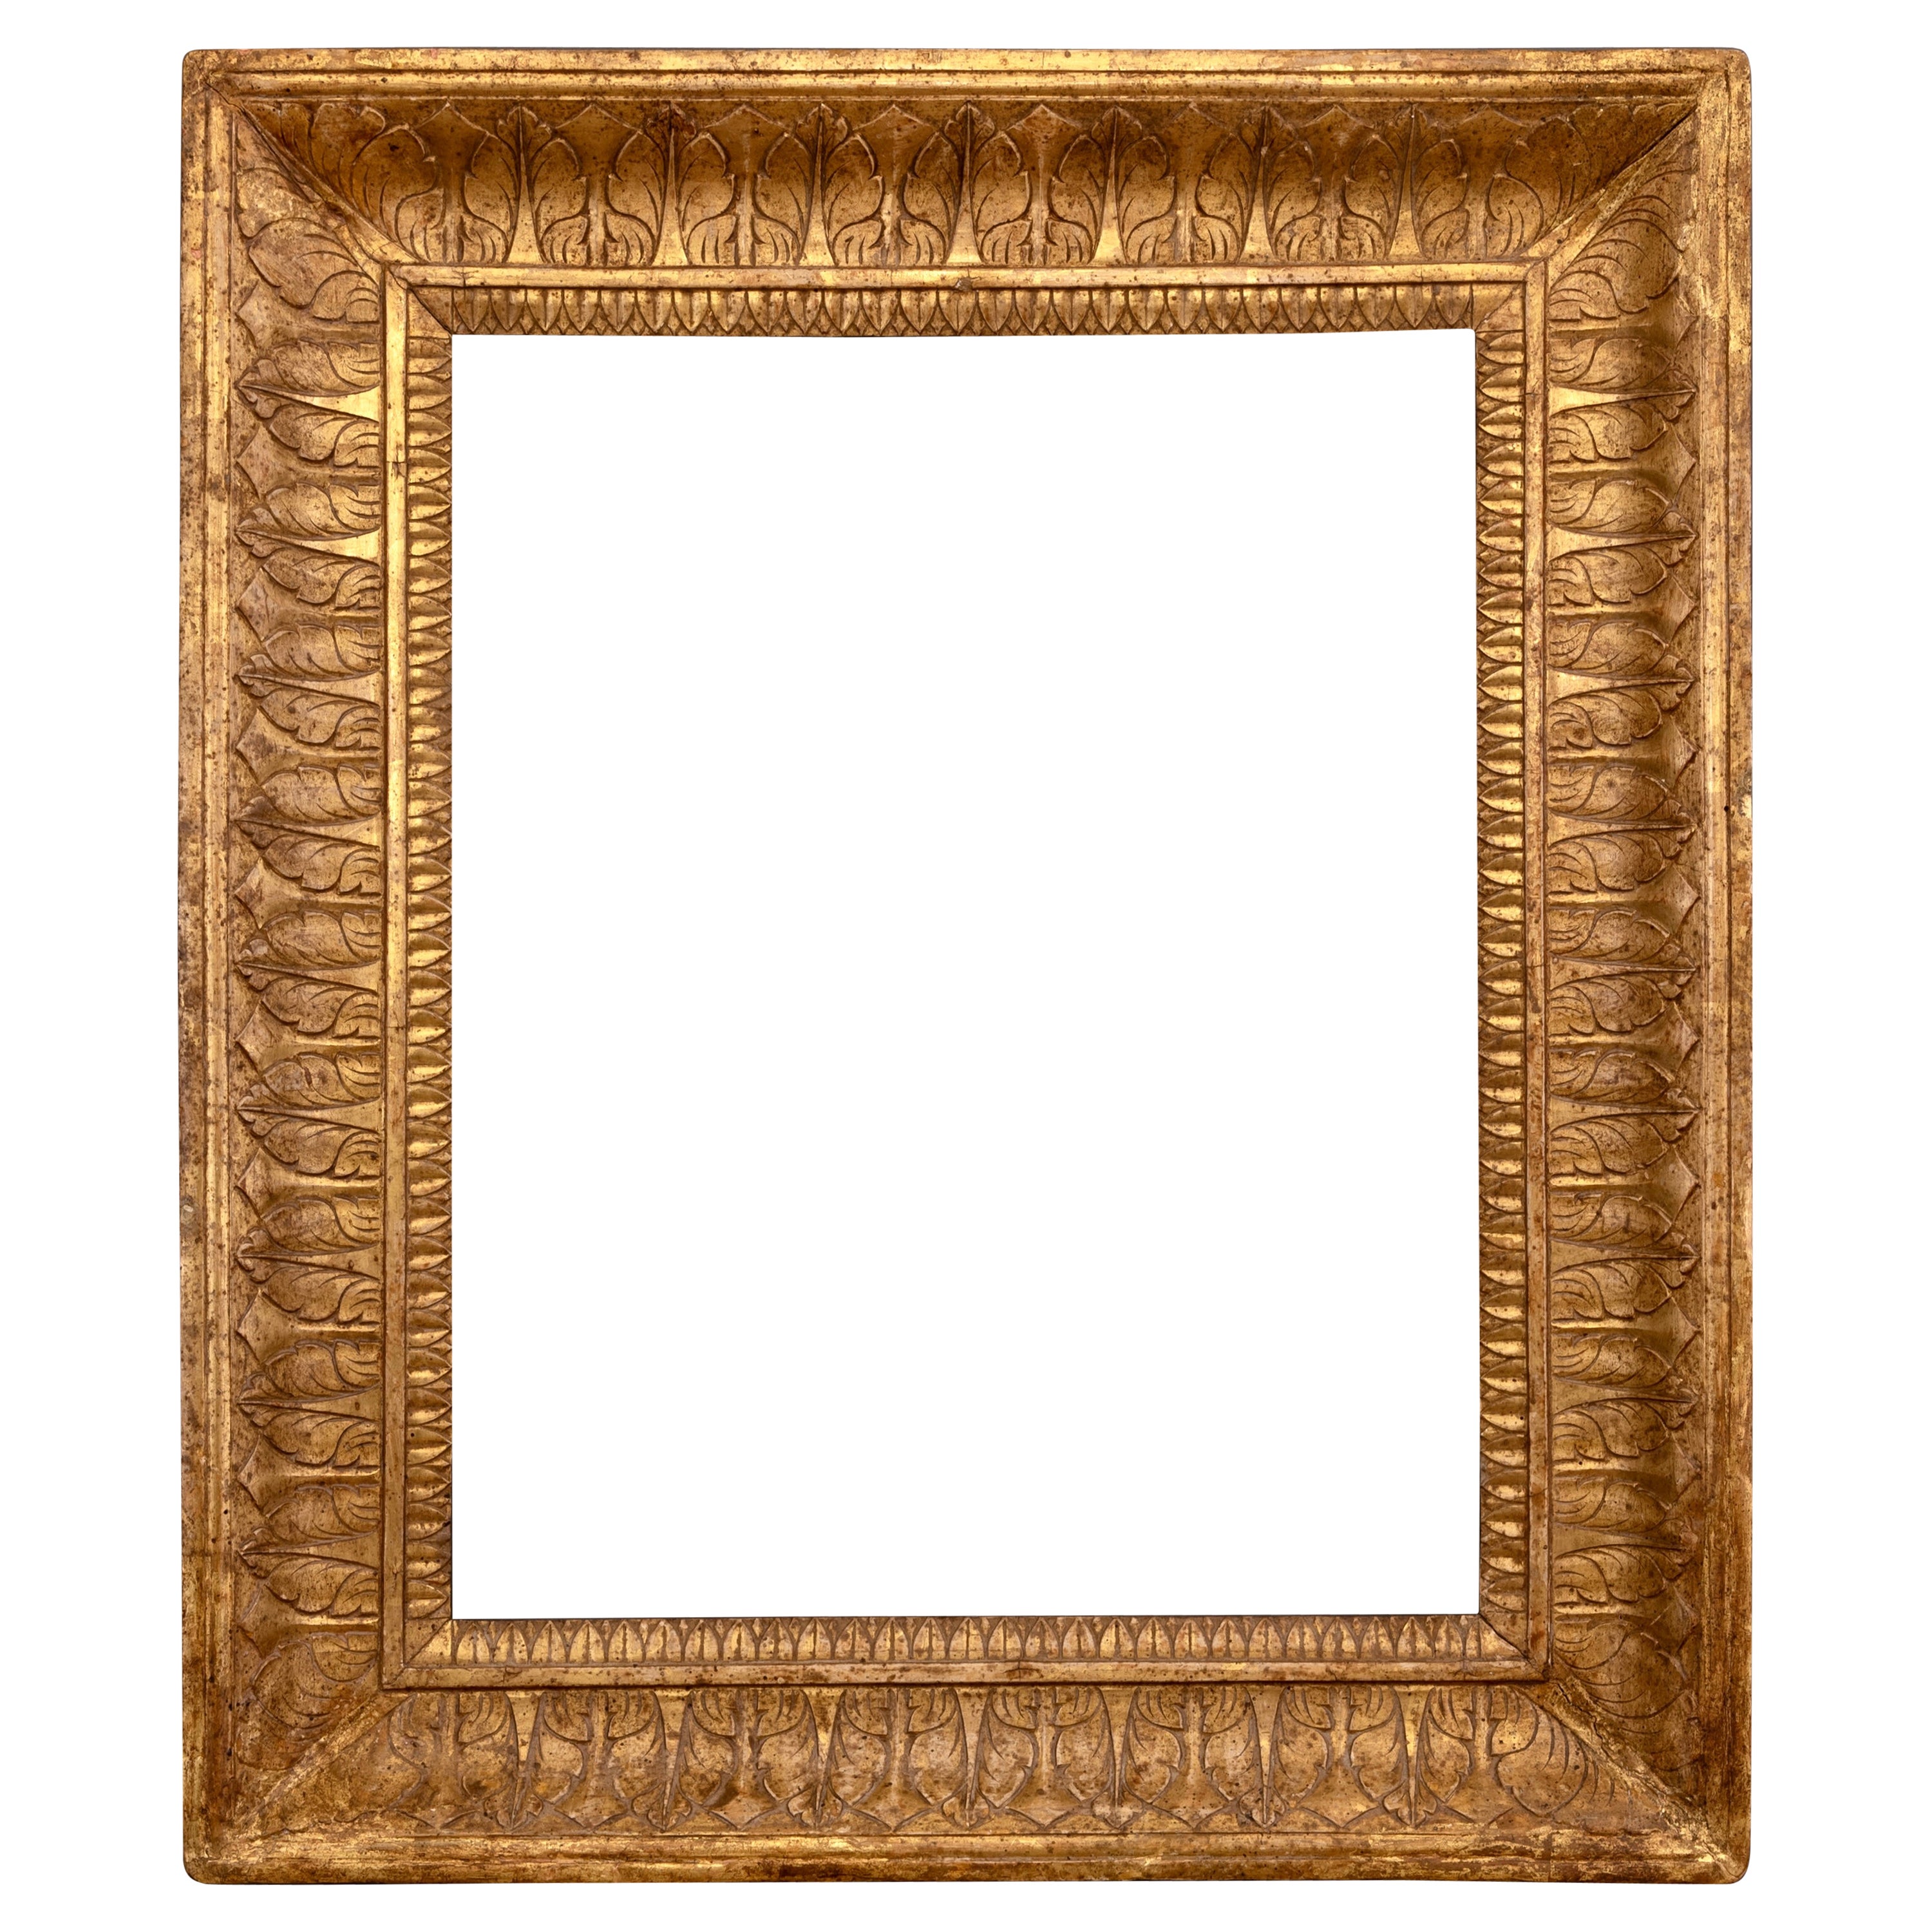 Period Giltwood Large Italian Empire Frame For Sale